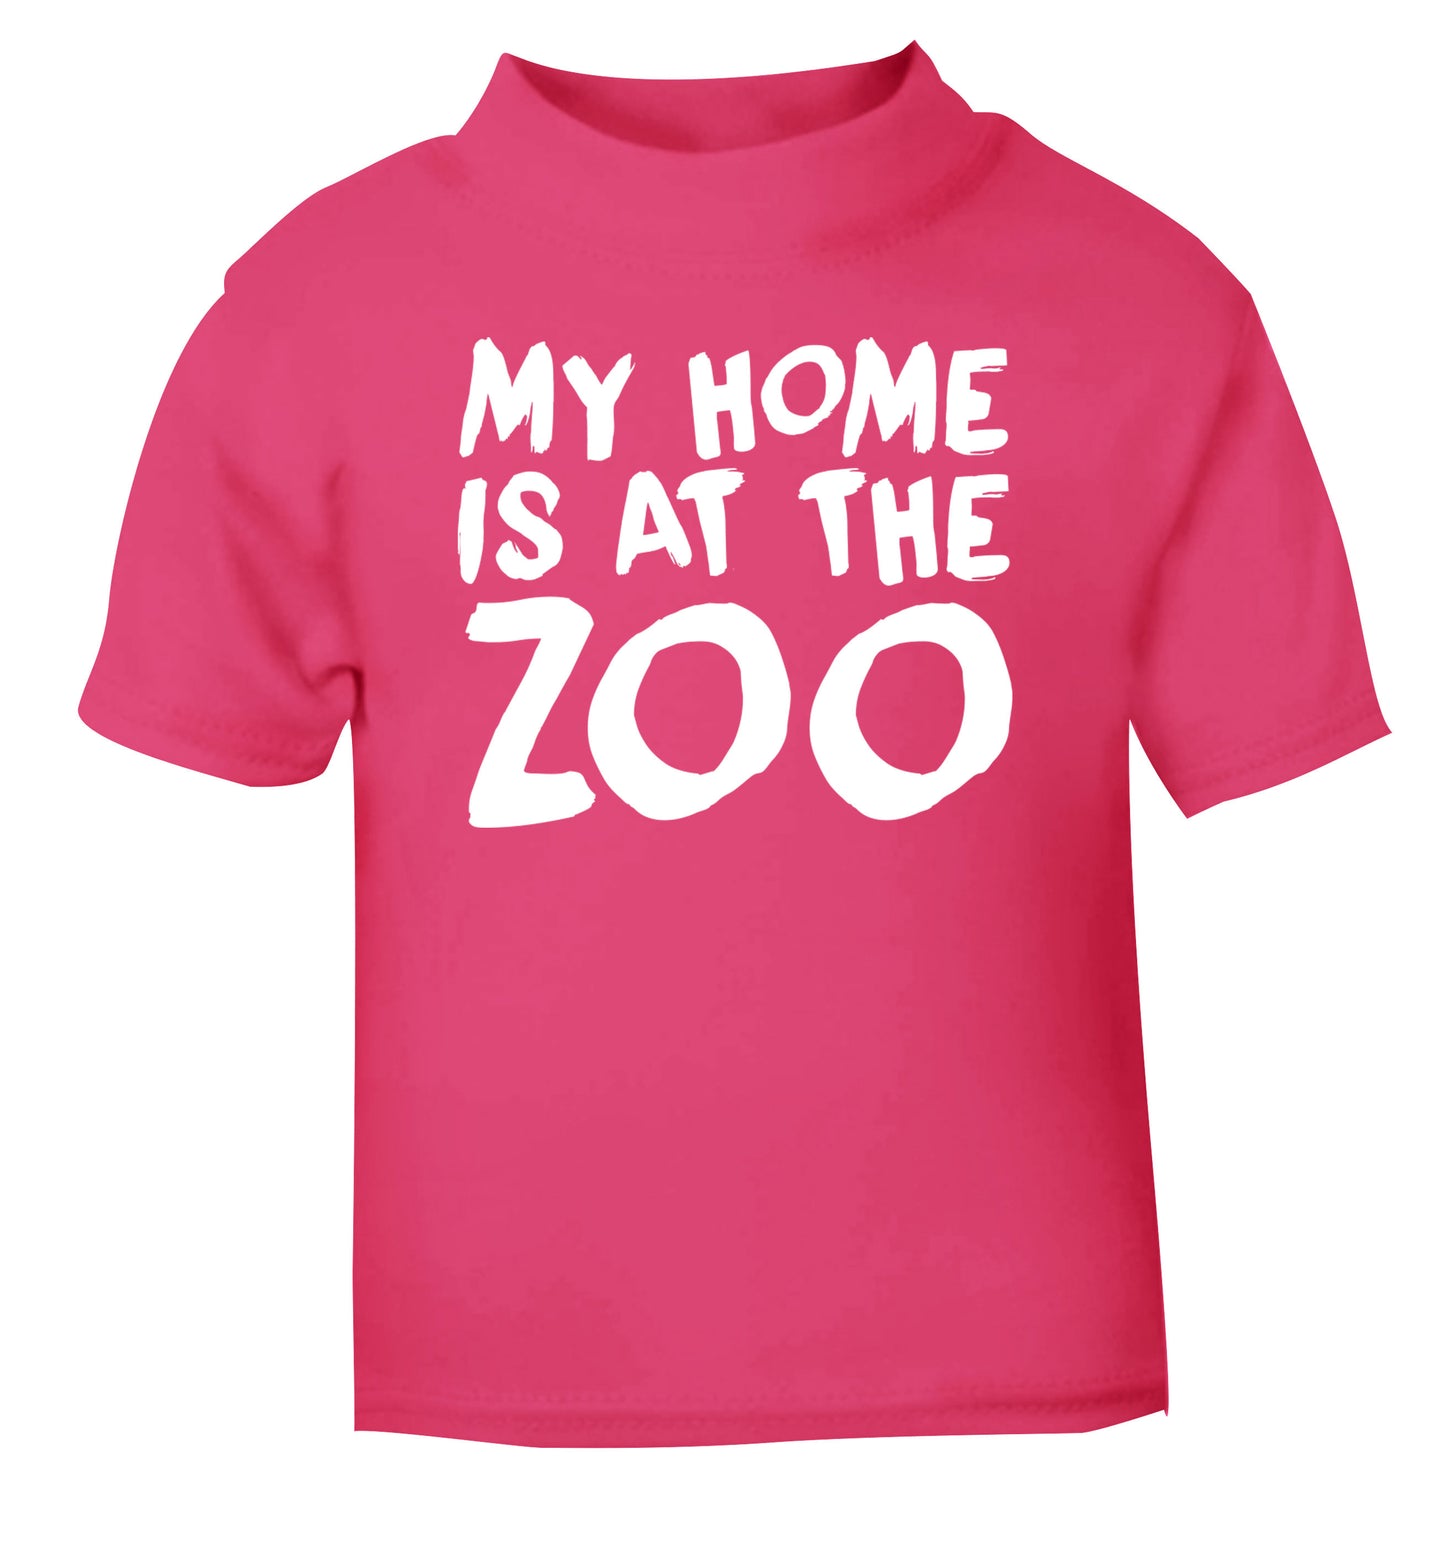 My home is at the zoo pink Baby Toddler Tshirt 2 Years